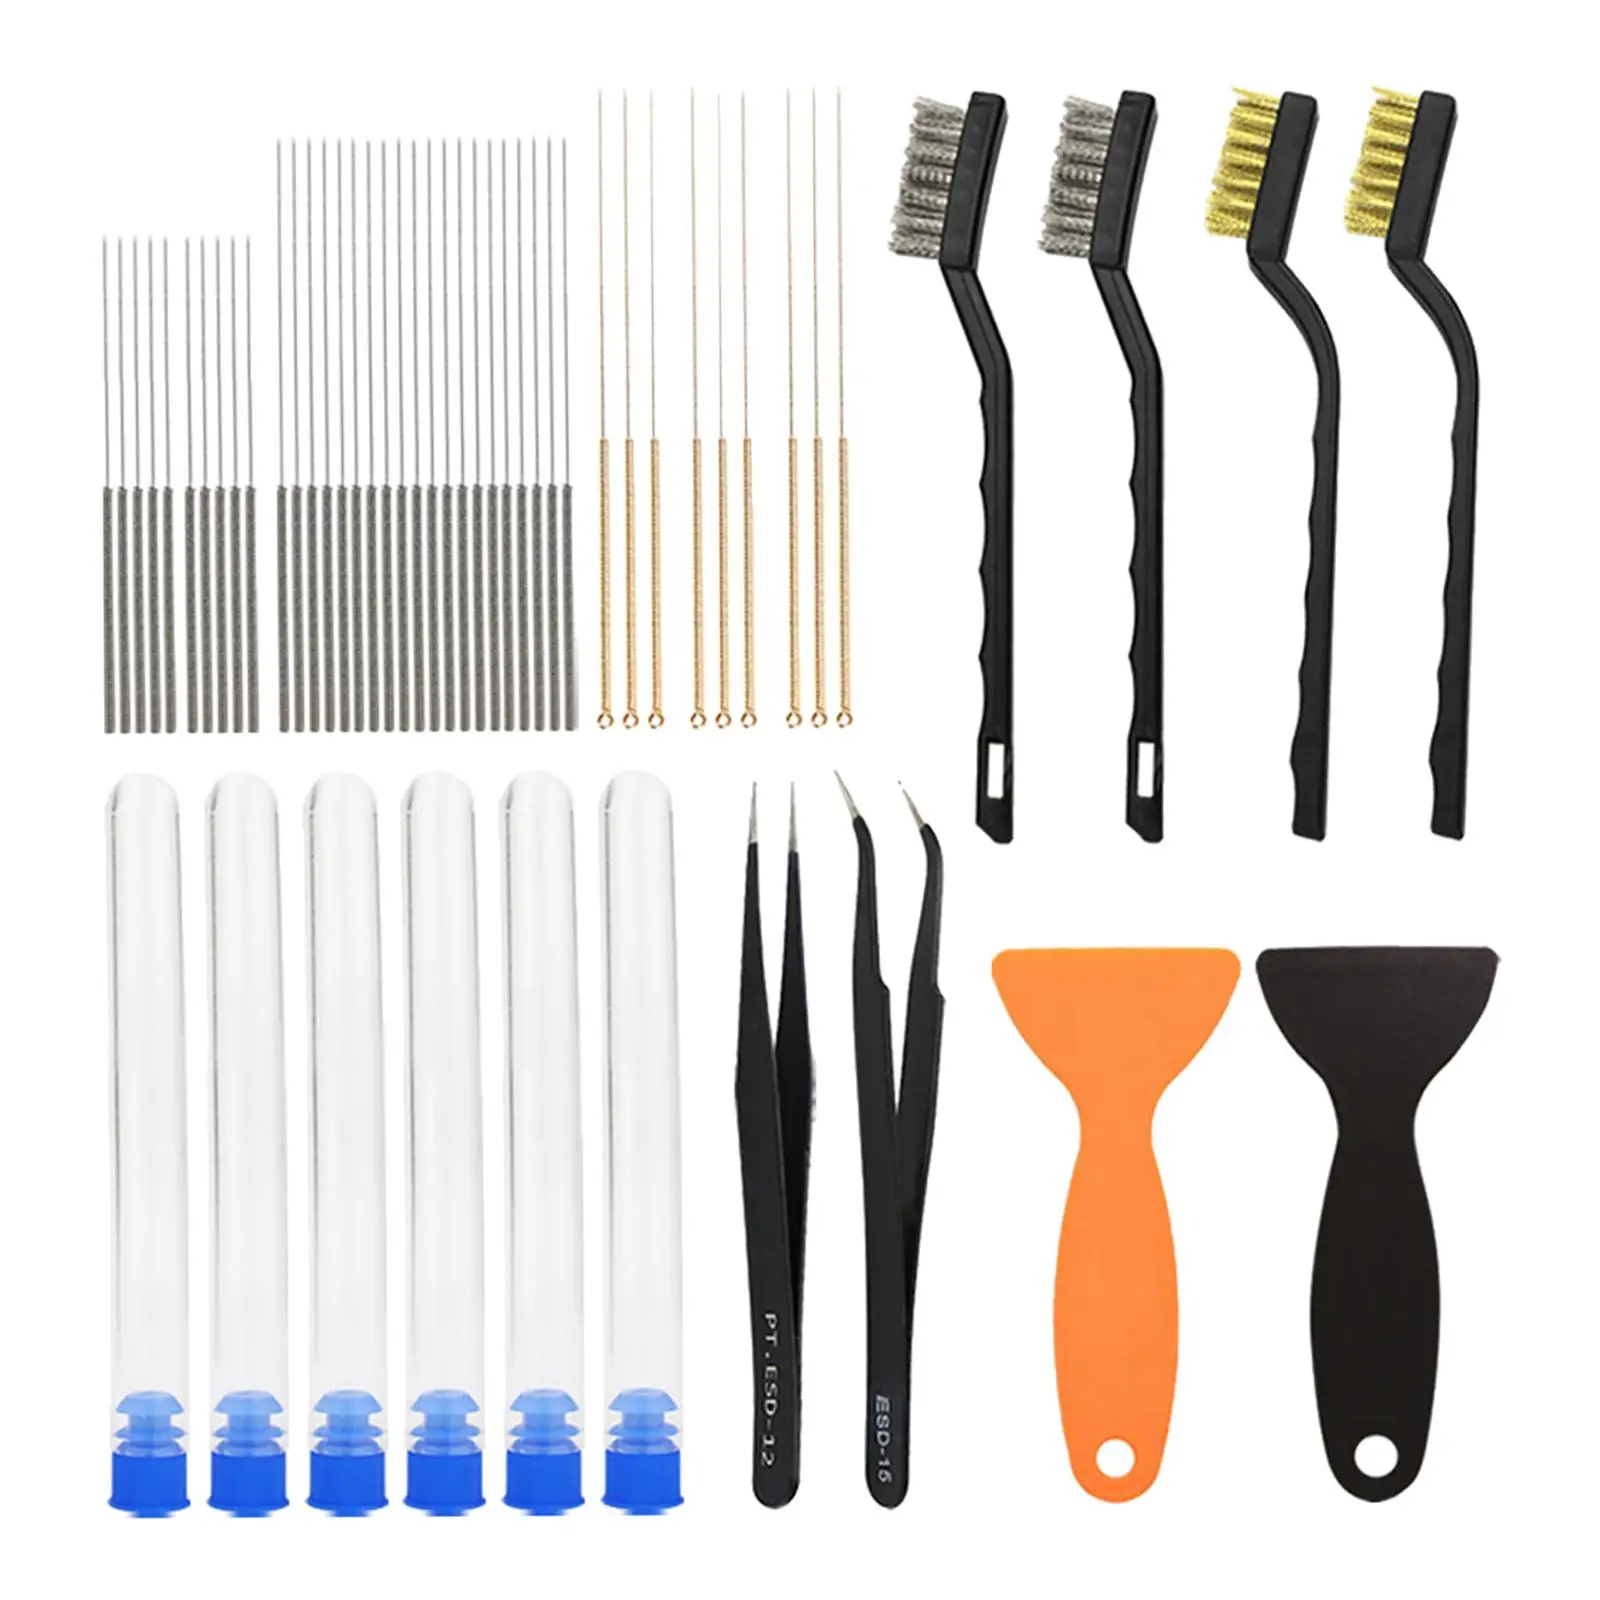 3D Printer Nozzles Cleaner Kits Stainless Steel Wire Brush 0.4mm  for ,